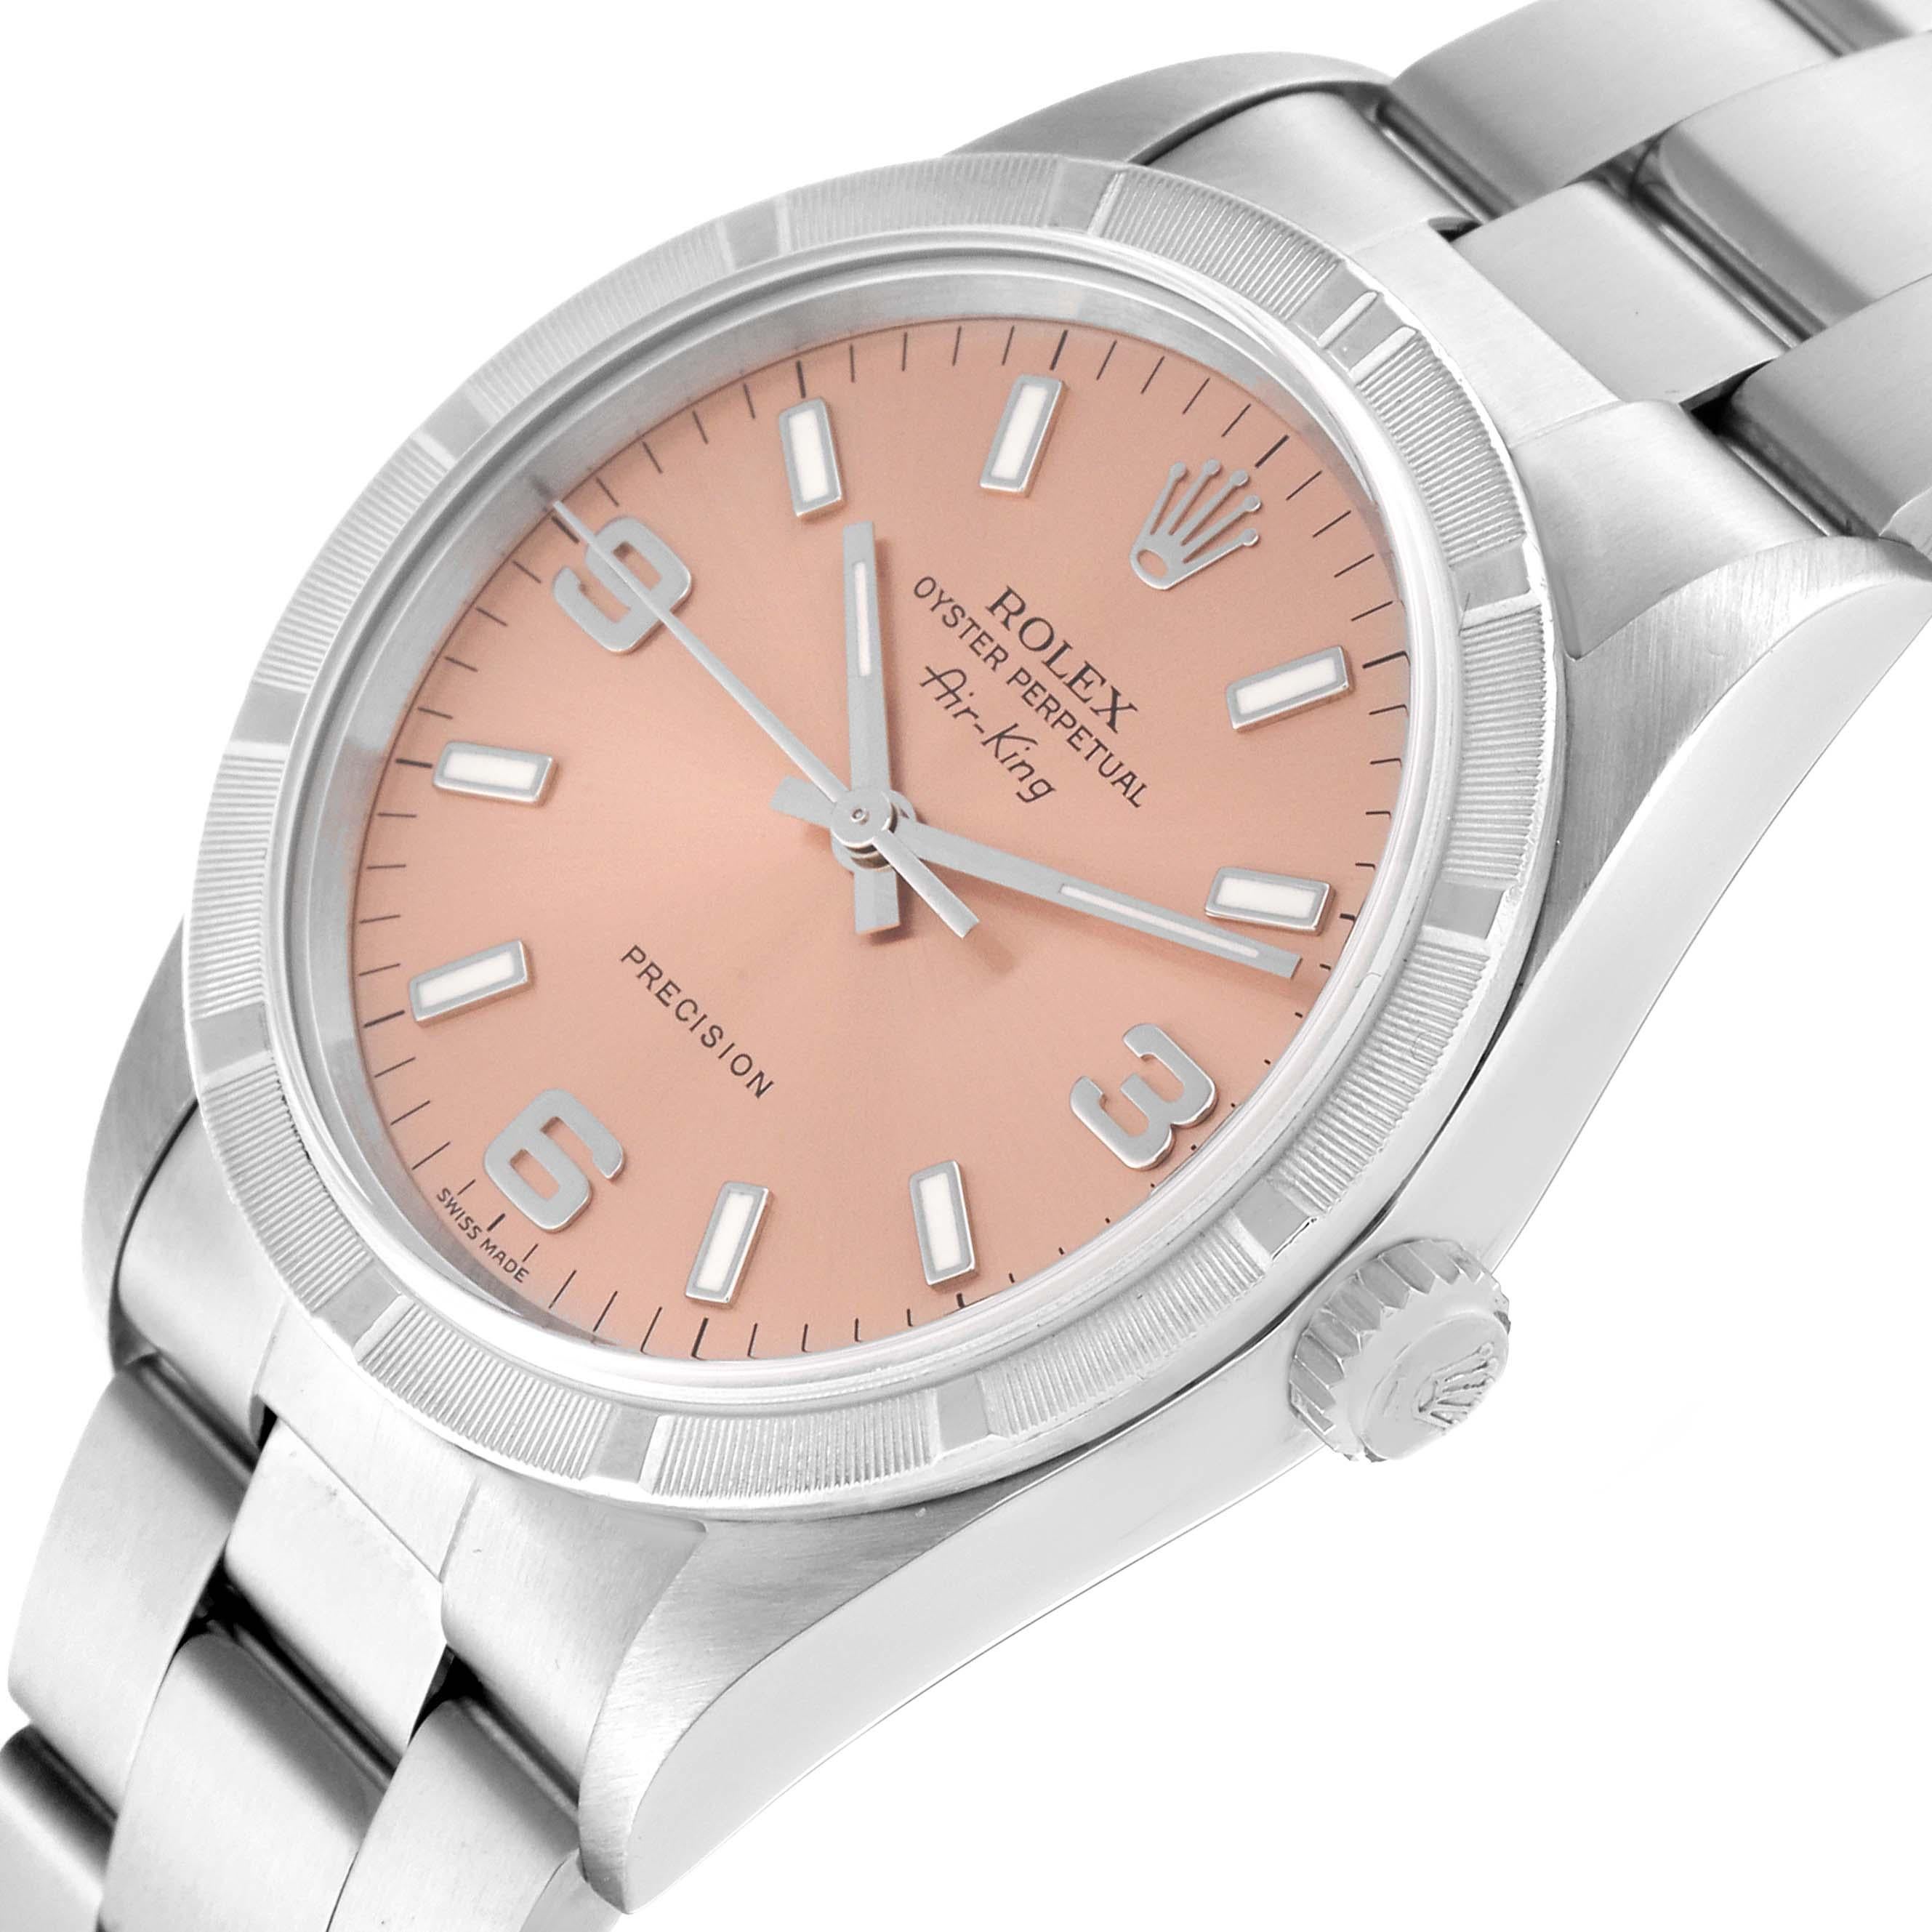 Rolex Air King 34 Salmon Dial Engine Turned Bezel Steel Mens Watch 14010. Automatic self-winding movement. Stainless steel case 34 mm in diameter. Rolex logo on the crown. Stainless steel engine turned bezel. Scratch resistant sapphire crystal.